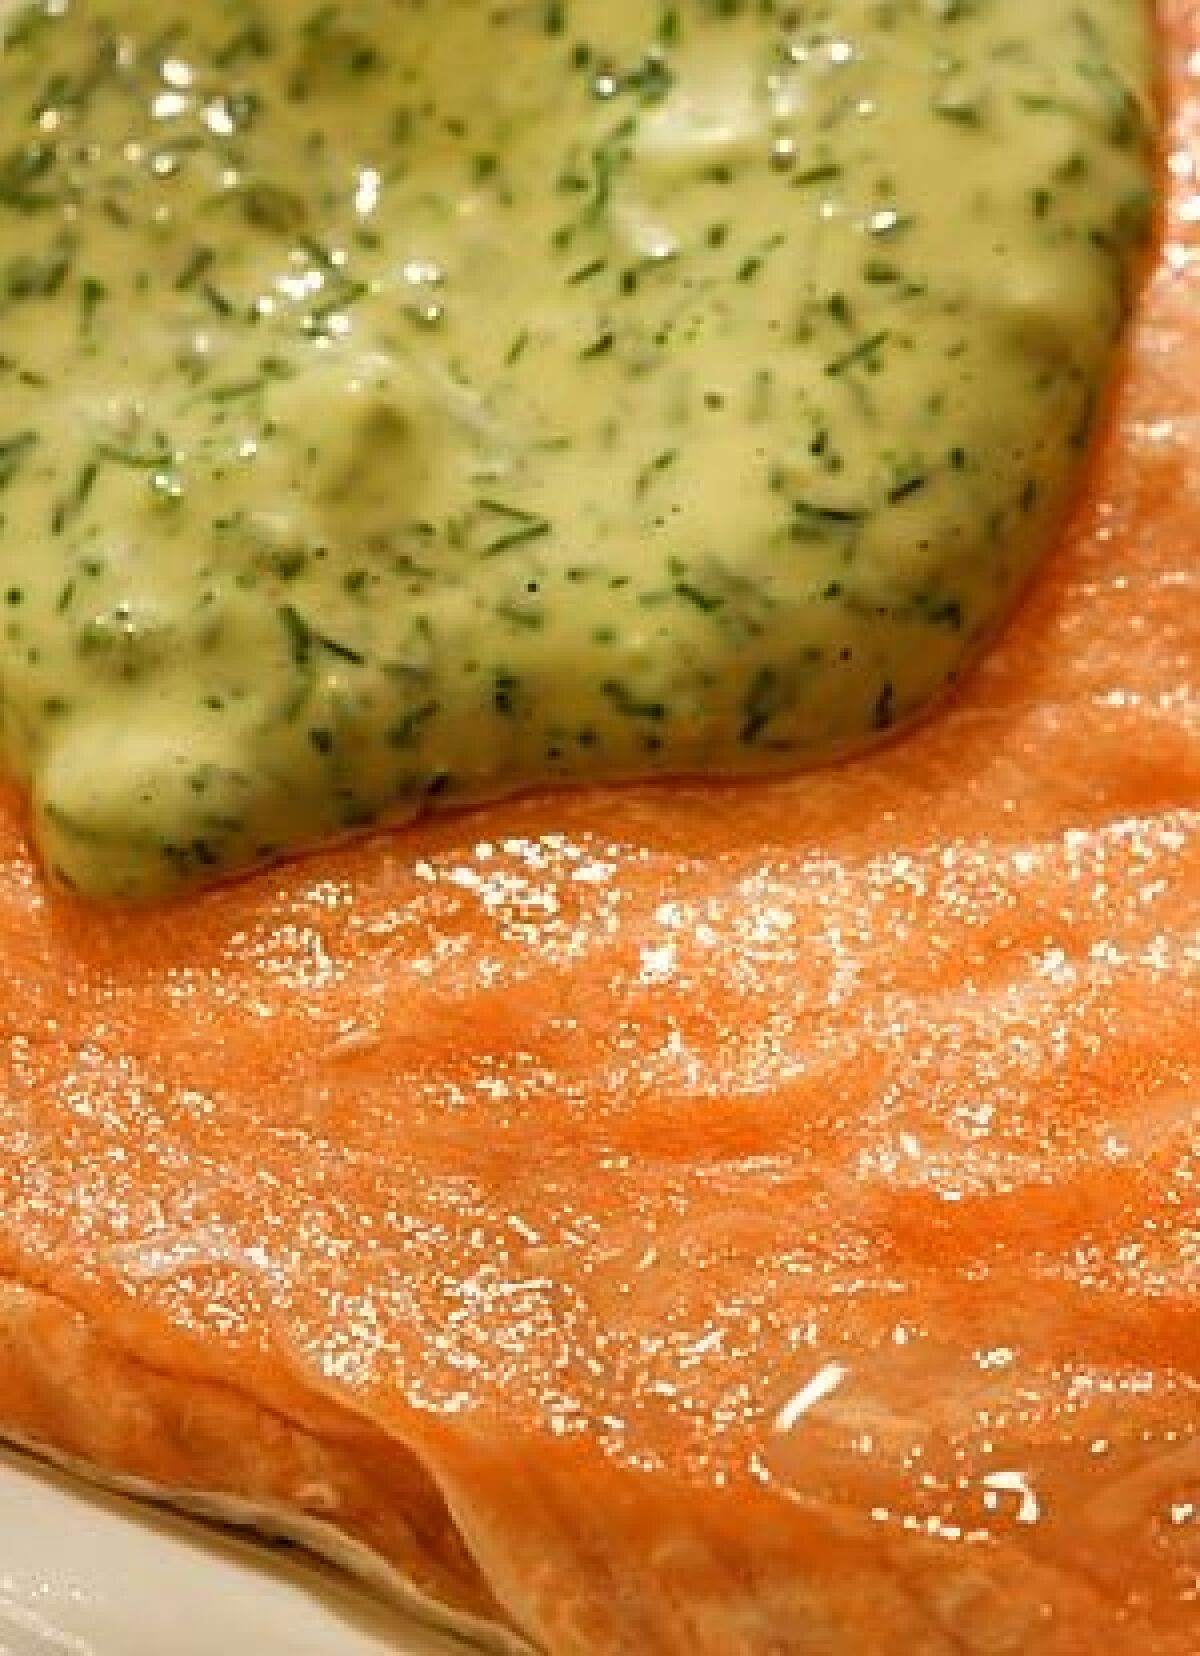 Oven-steamed salmon with dill sauce.